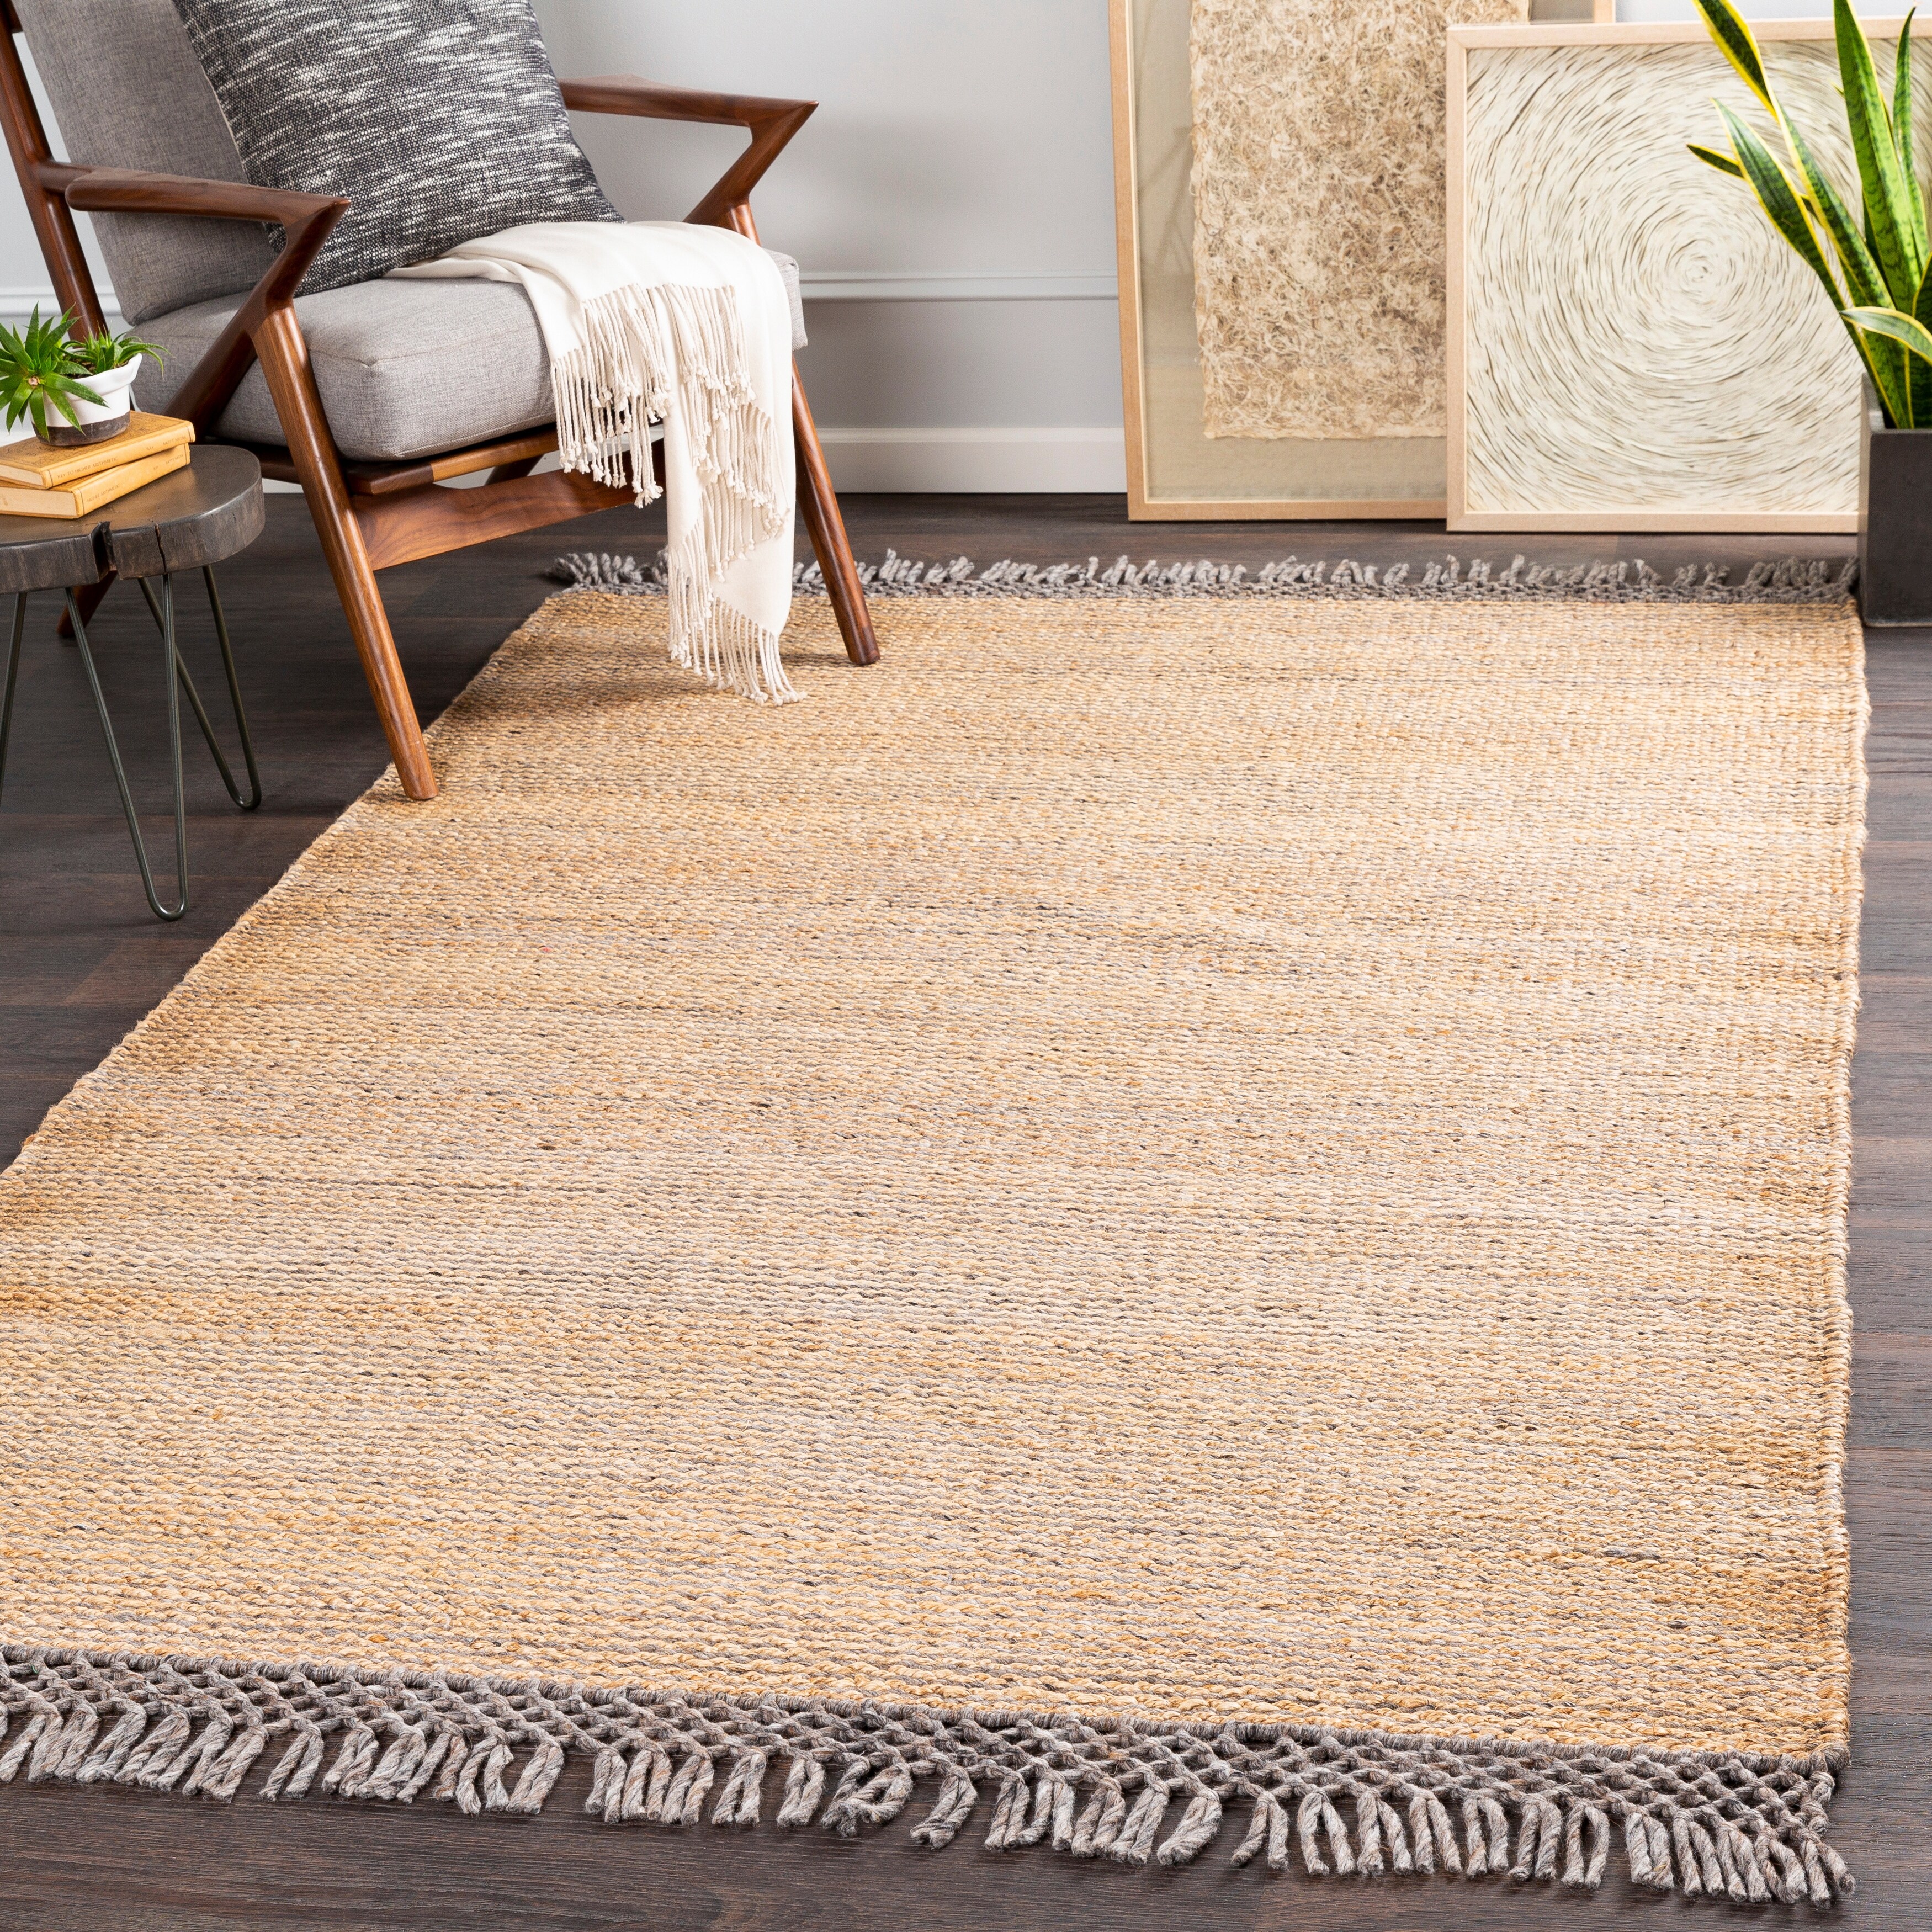 Grey Natural High Quality Self Patterned Striped Modern Handmade 100% Wool Rugs 